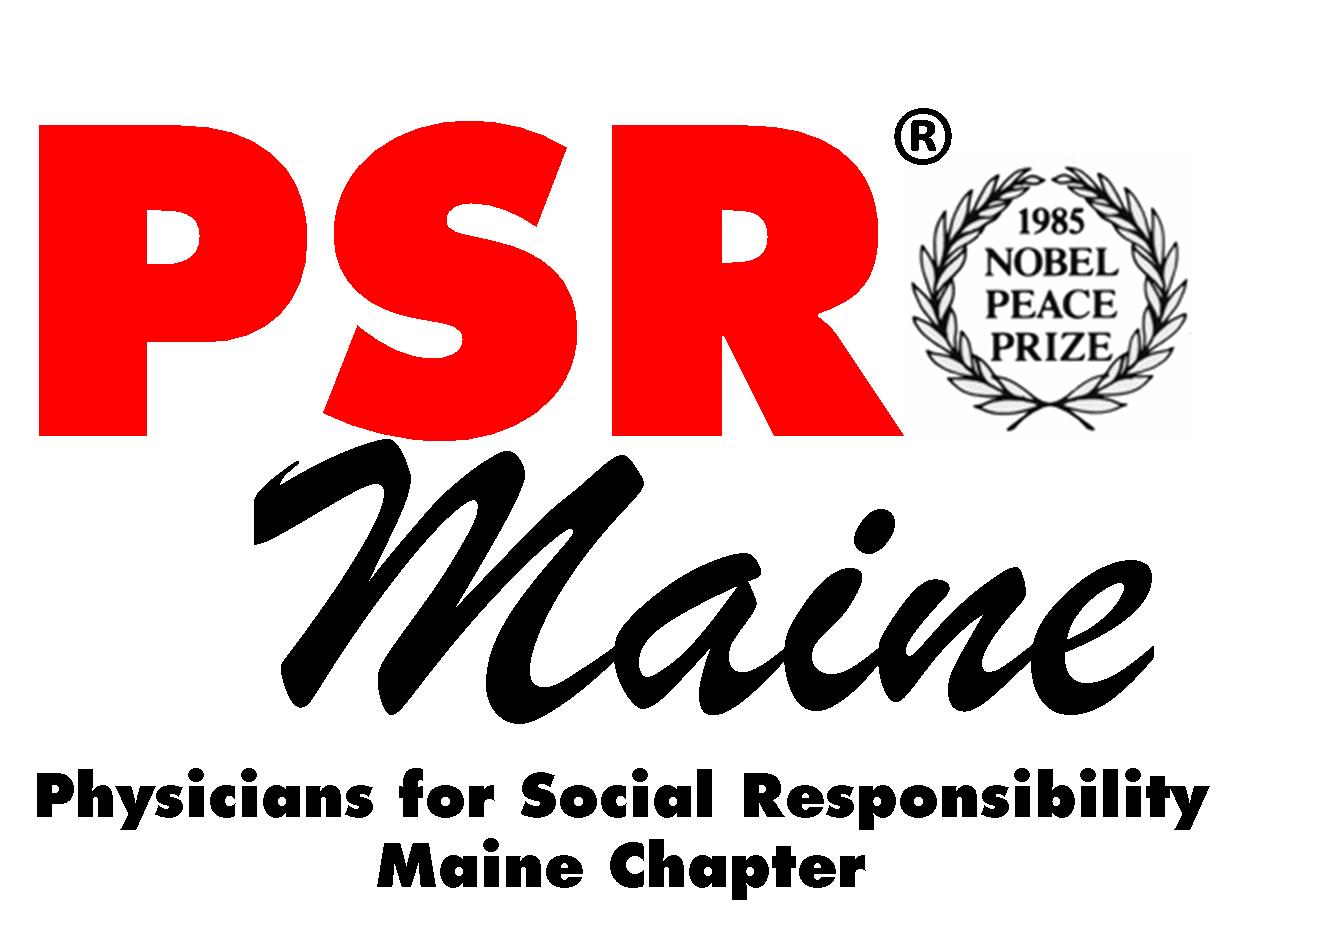 Physicians for Social Responsibility- Maine